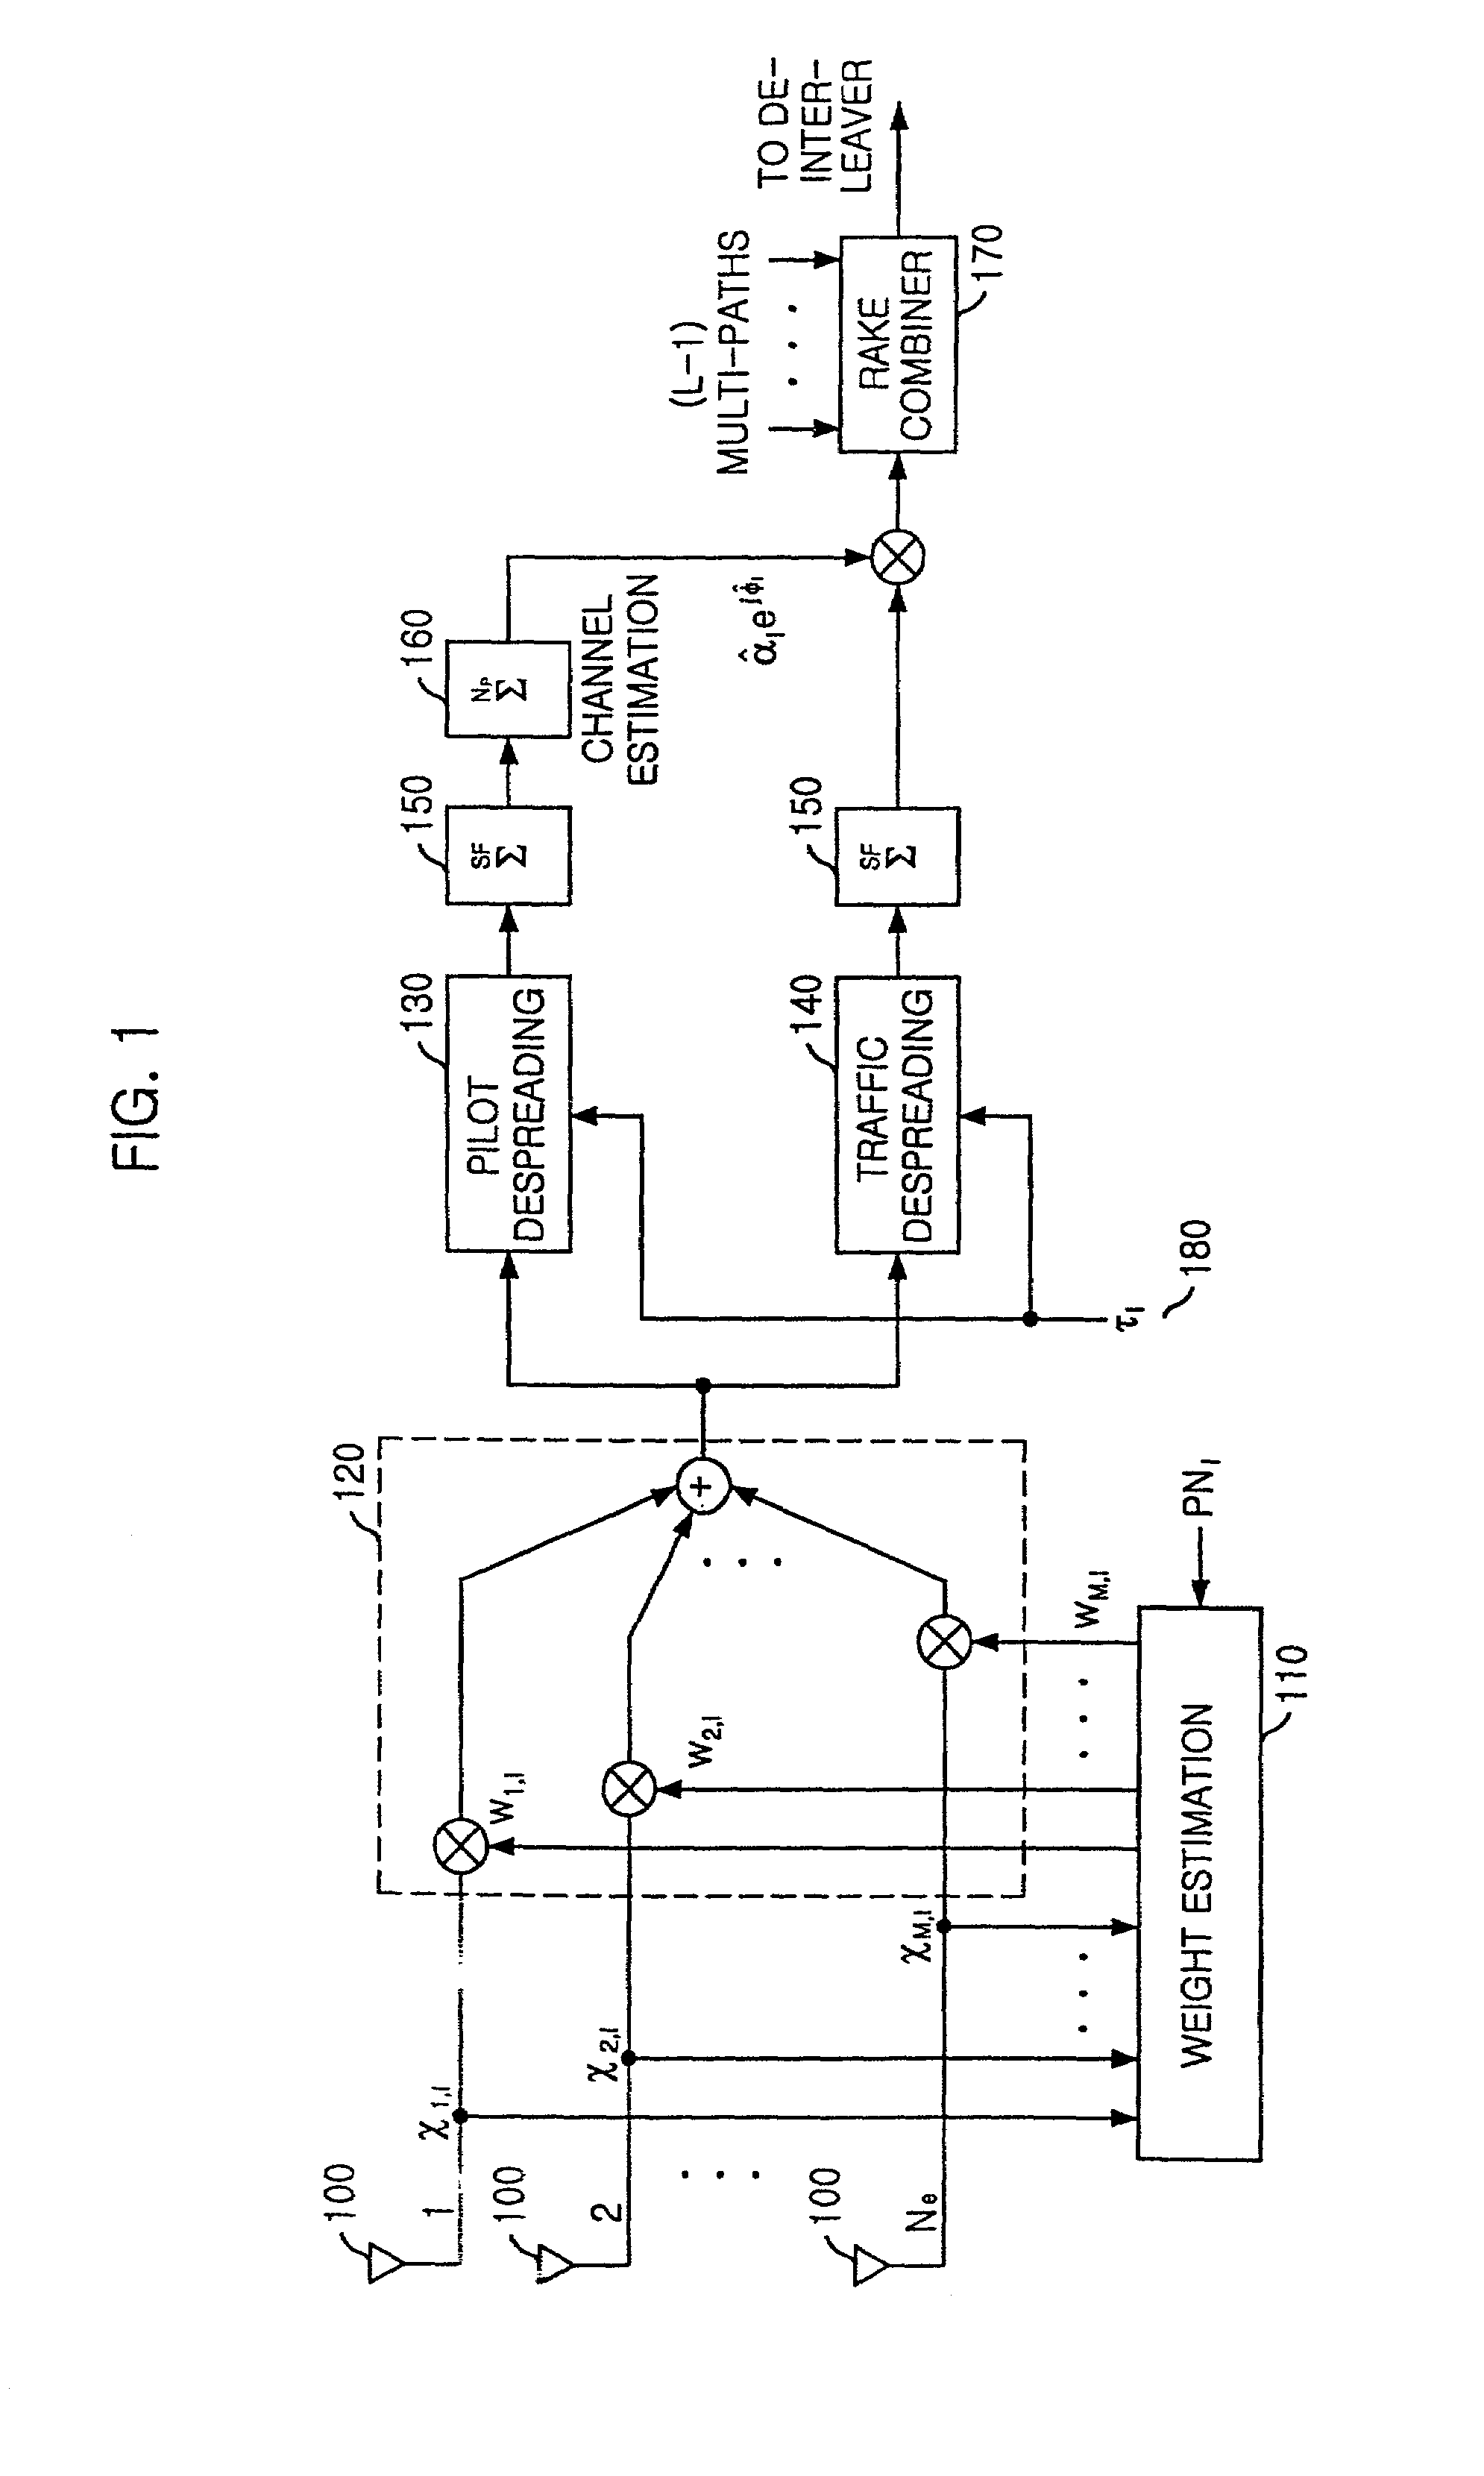 Apparatus and method for very high performance space-time array reception processing using chip-level beamforming and fading rate adaptation